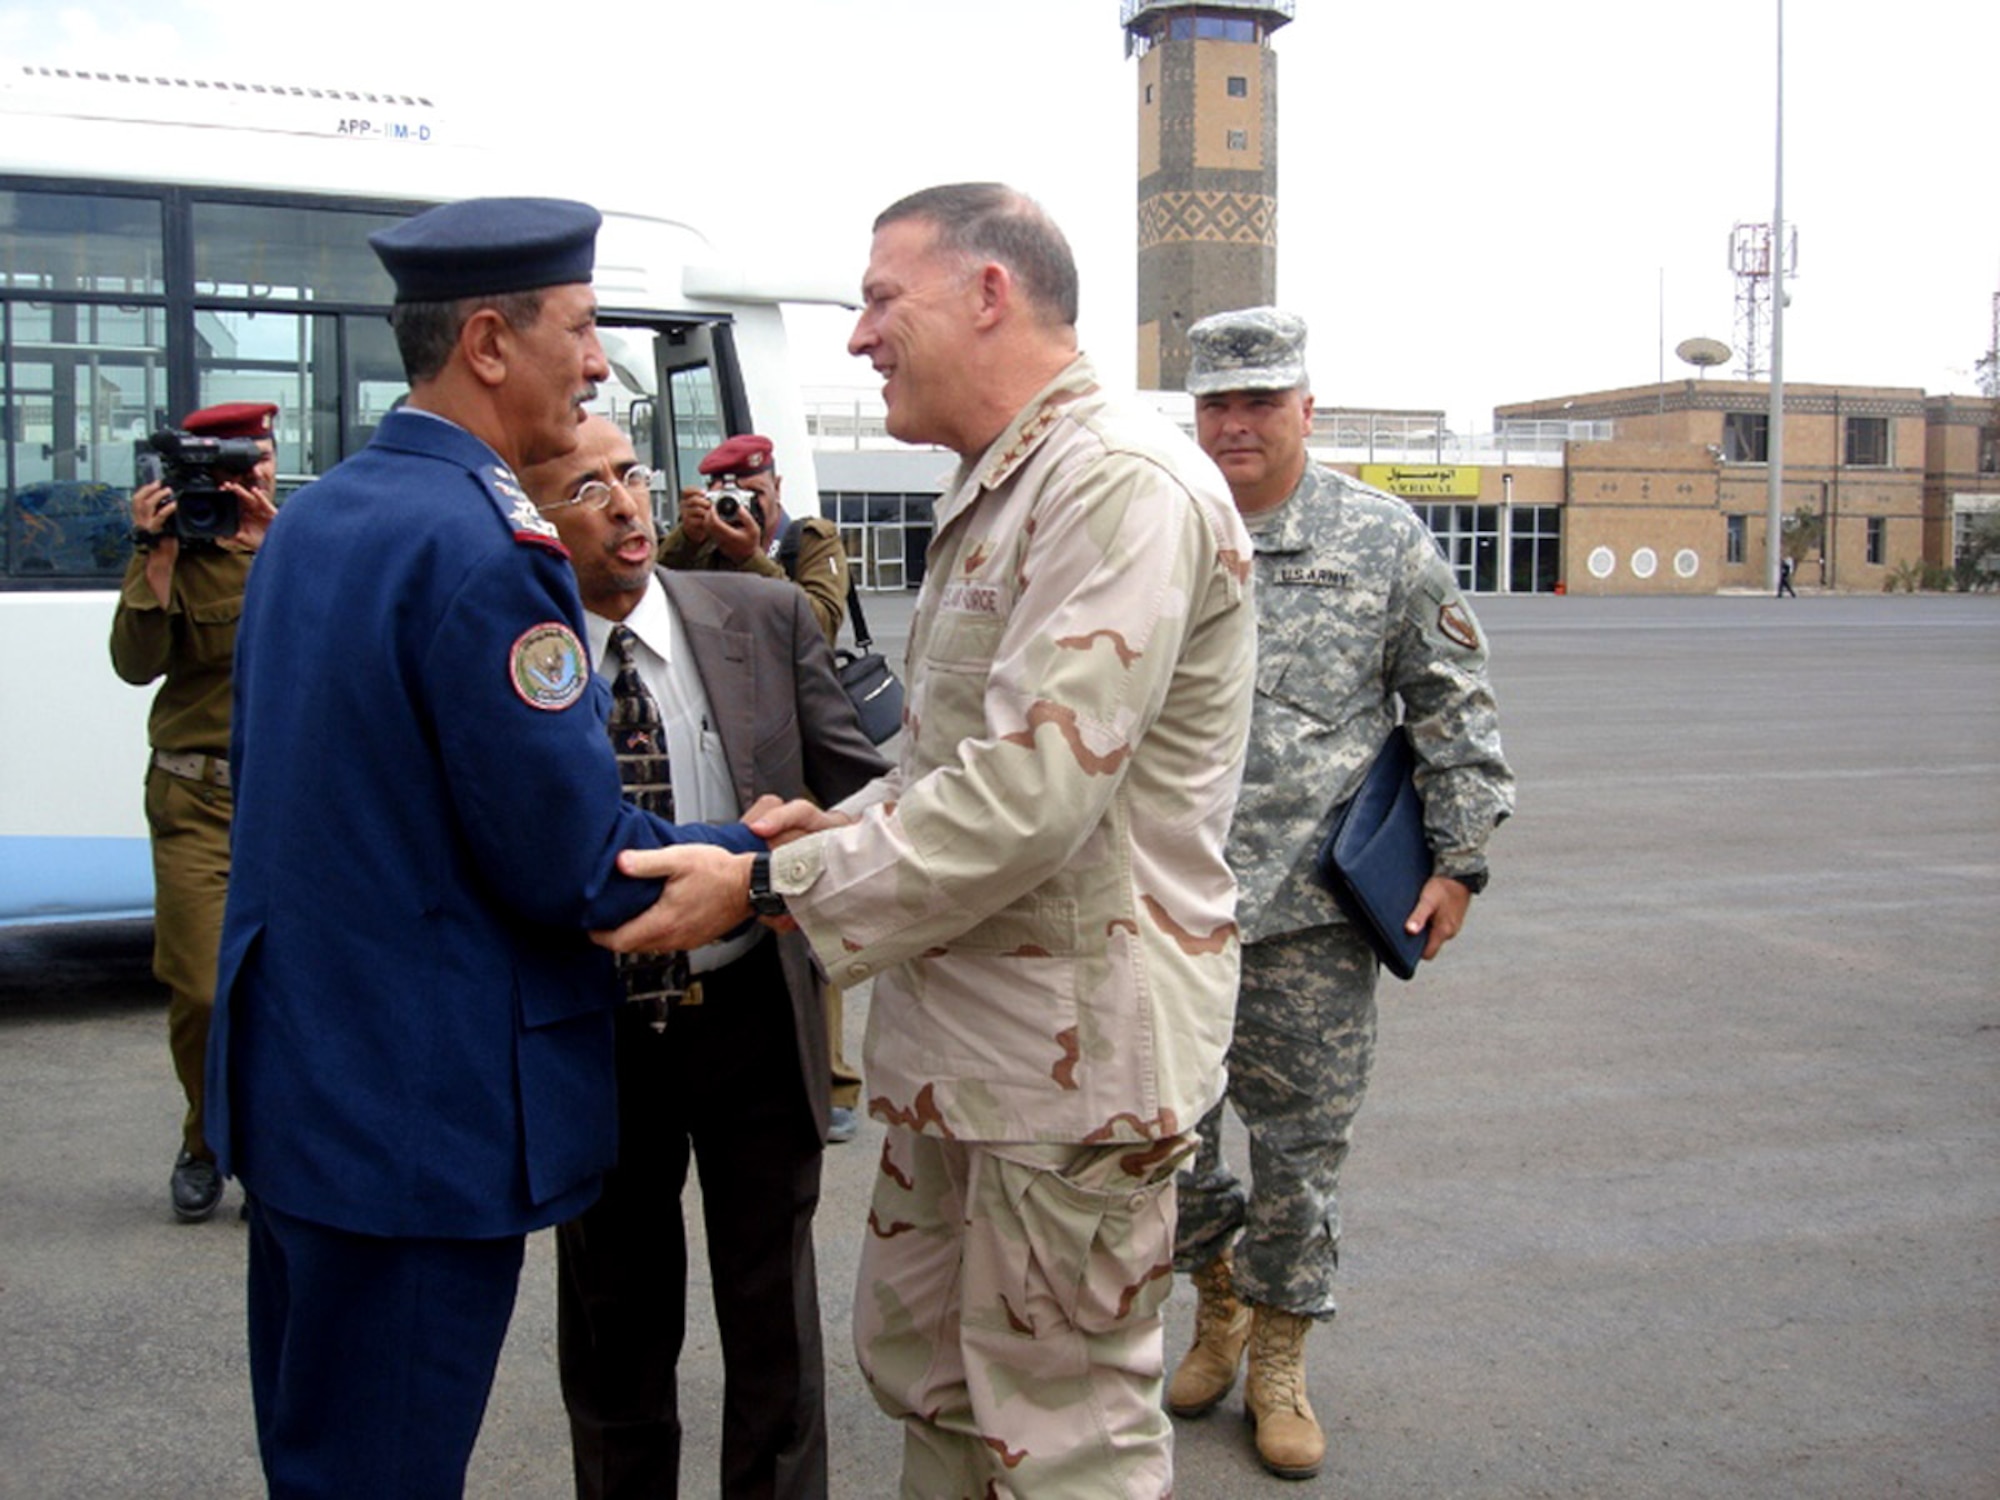 Gen. Ibrahim Al Kibsi of the Yemeni air force greets Lt. Gen. Gary L. North upon his arrival at the Sana'a airport Feb. 7 in Yemen. General North is the commander of U.S. Central Command Air Forces and met with senior Yemini air force officials and the U.S. ambassador to Yemen. (U.S. State Department photo/Ann Marie Roubachewsky) 
